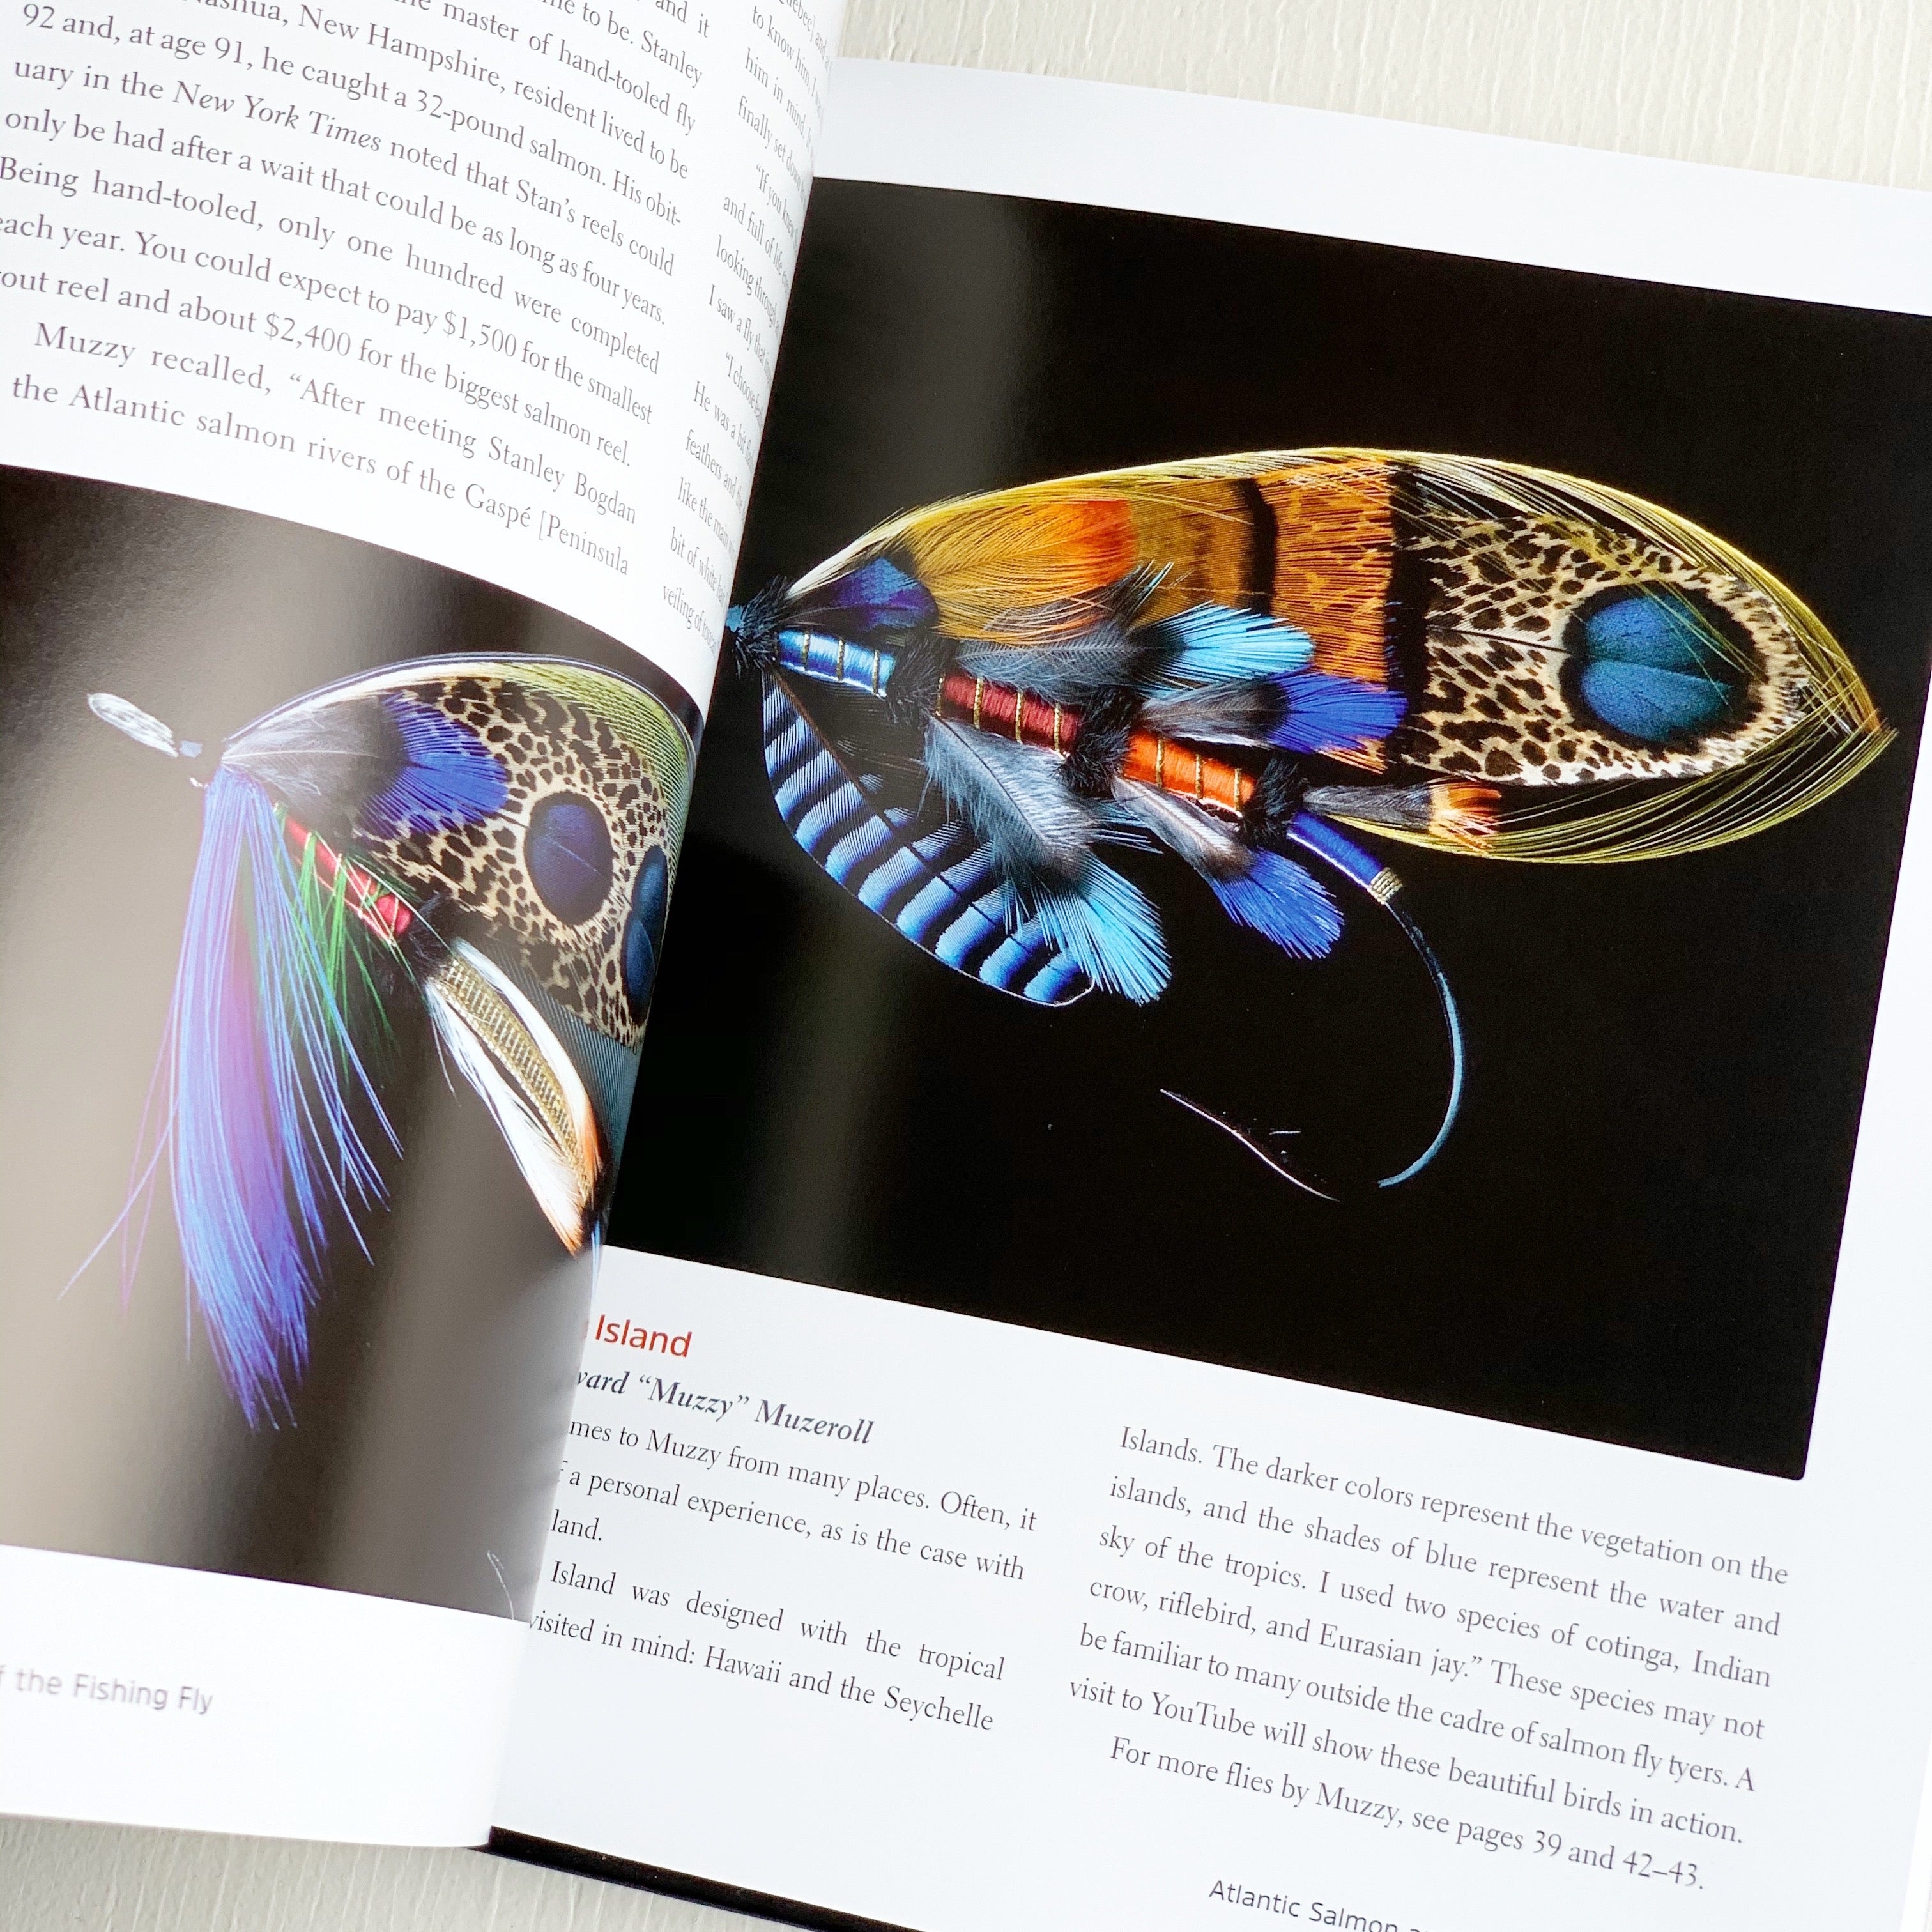 The Art of Fly Fishings